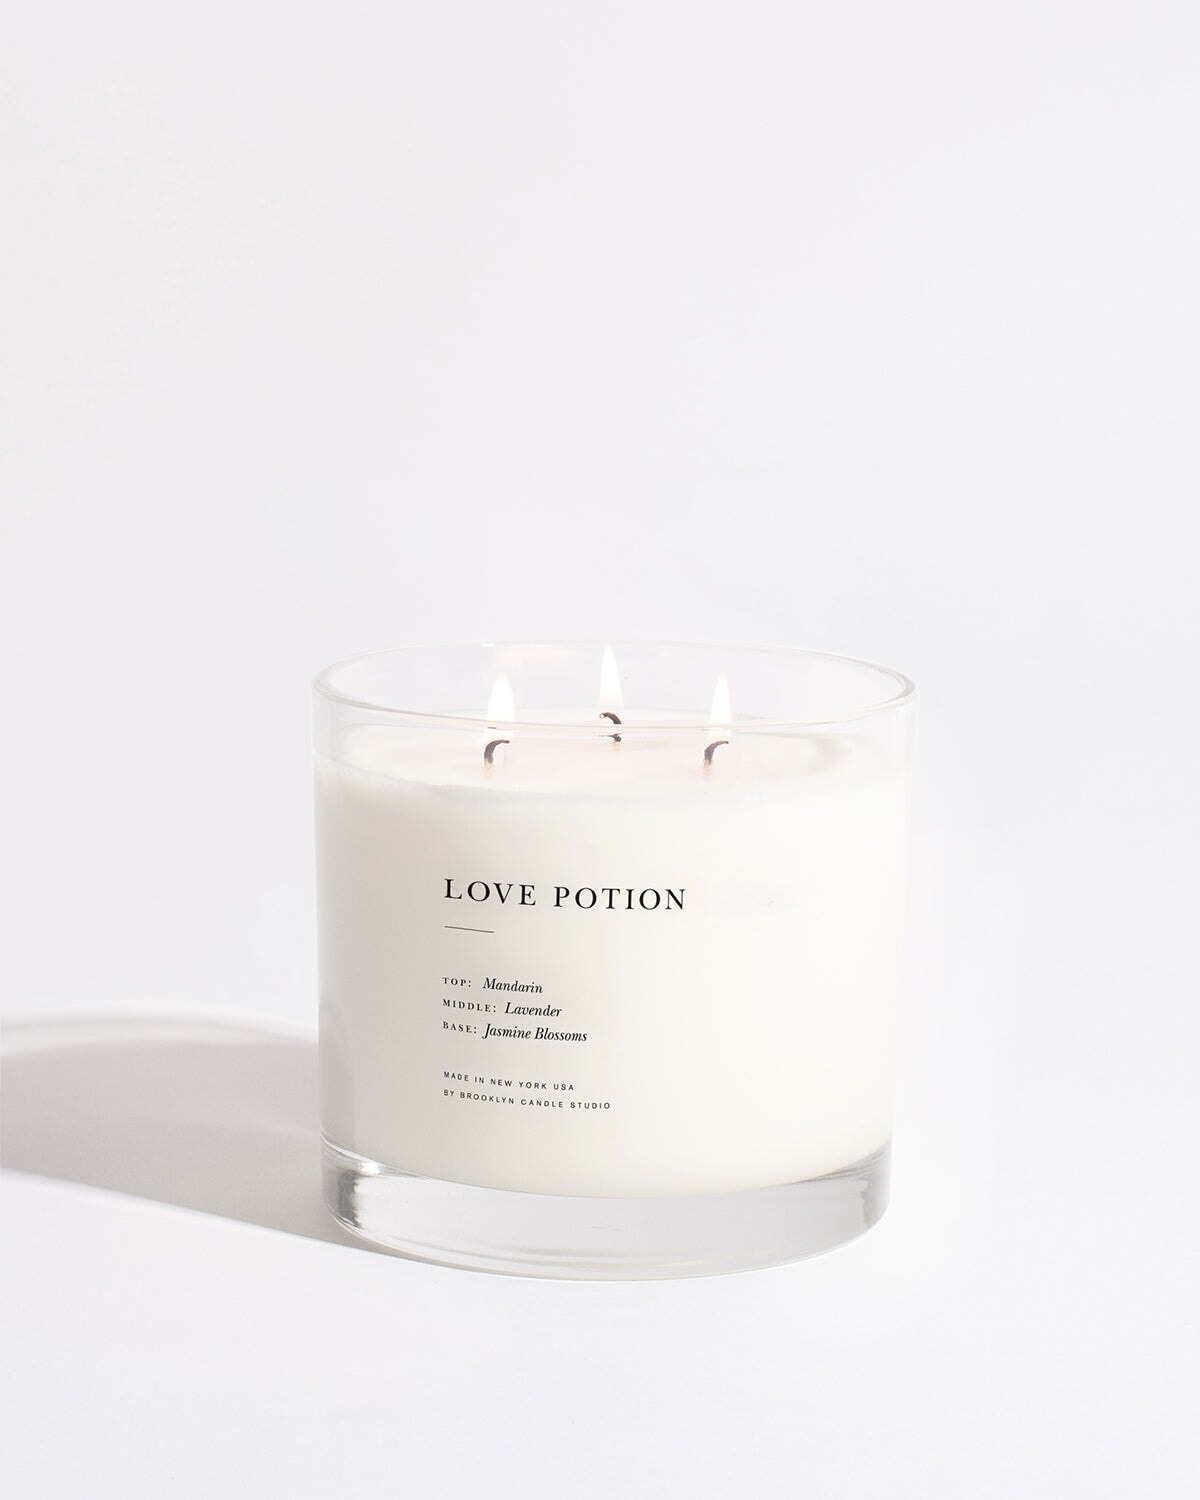 Love Potion Maximalist 3-Wick Candle by Brooklyn Candle Studio